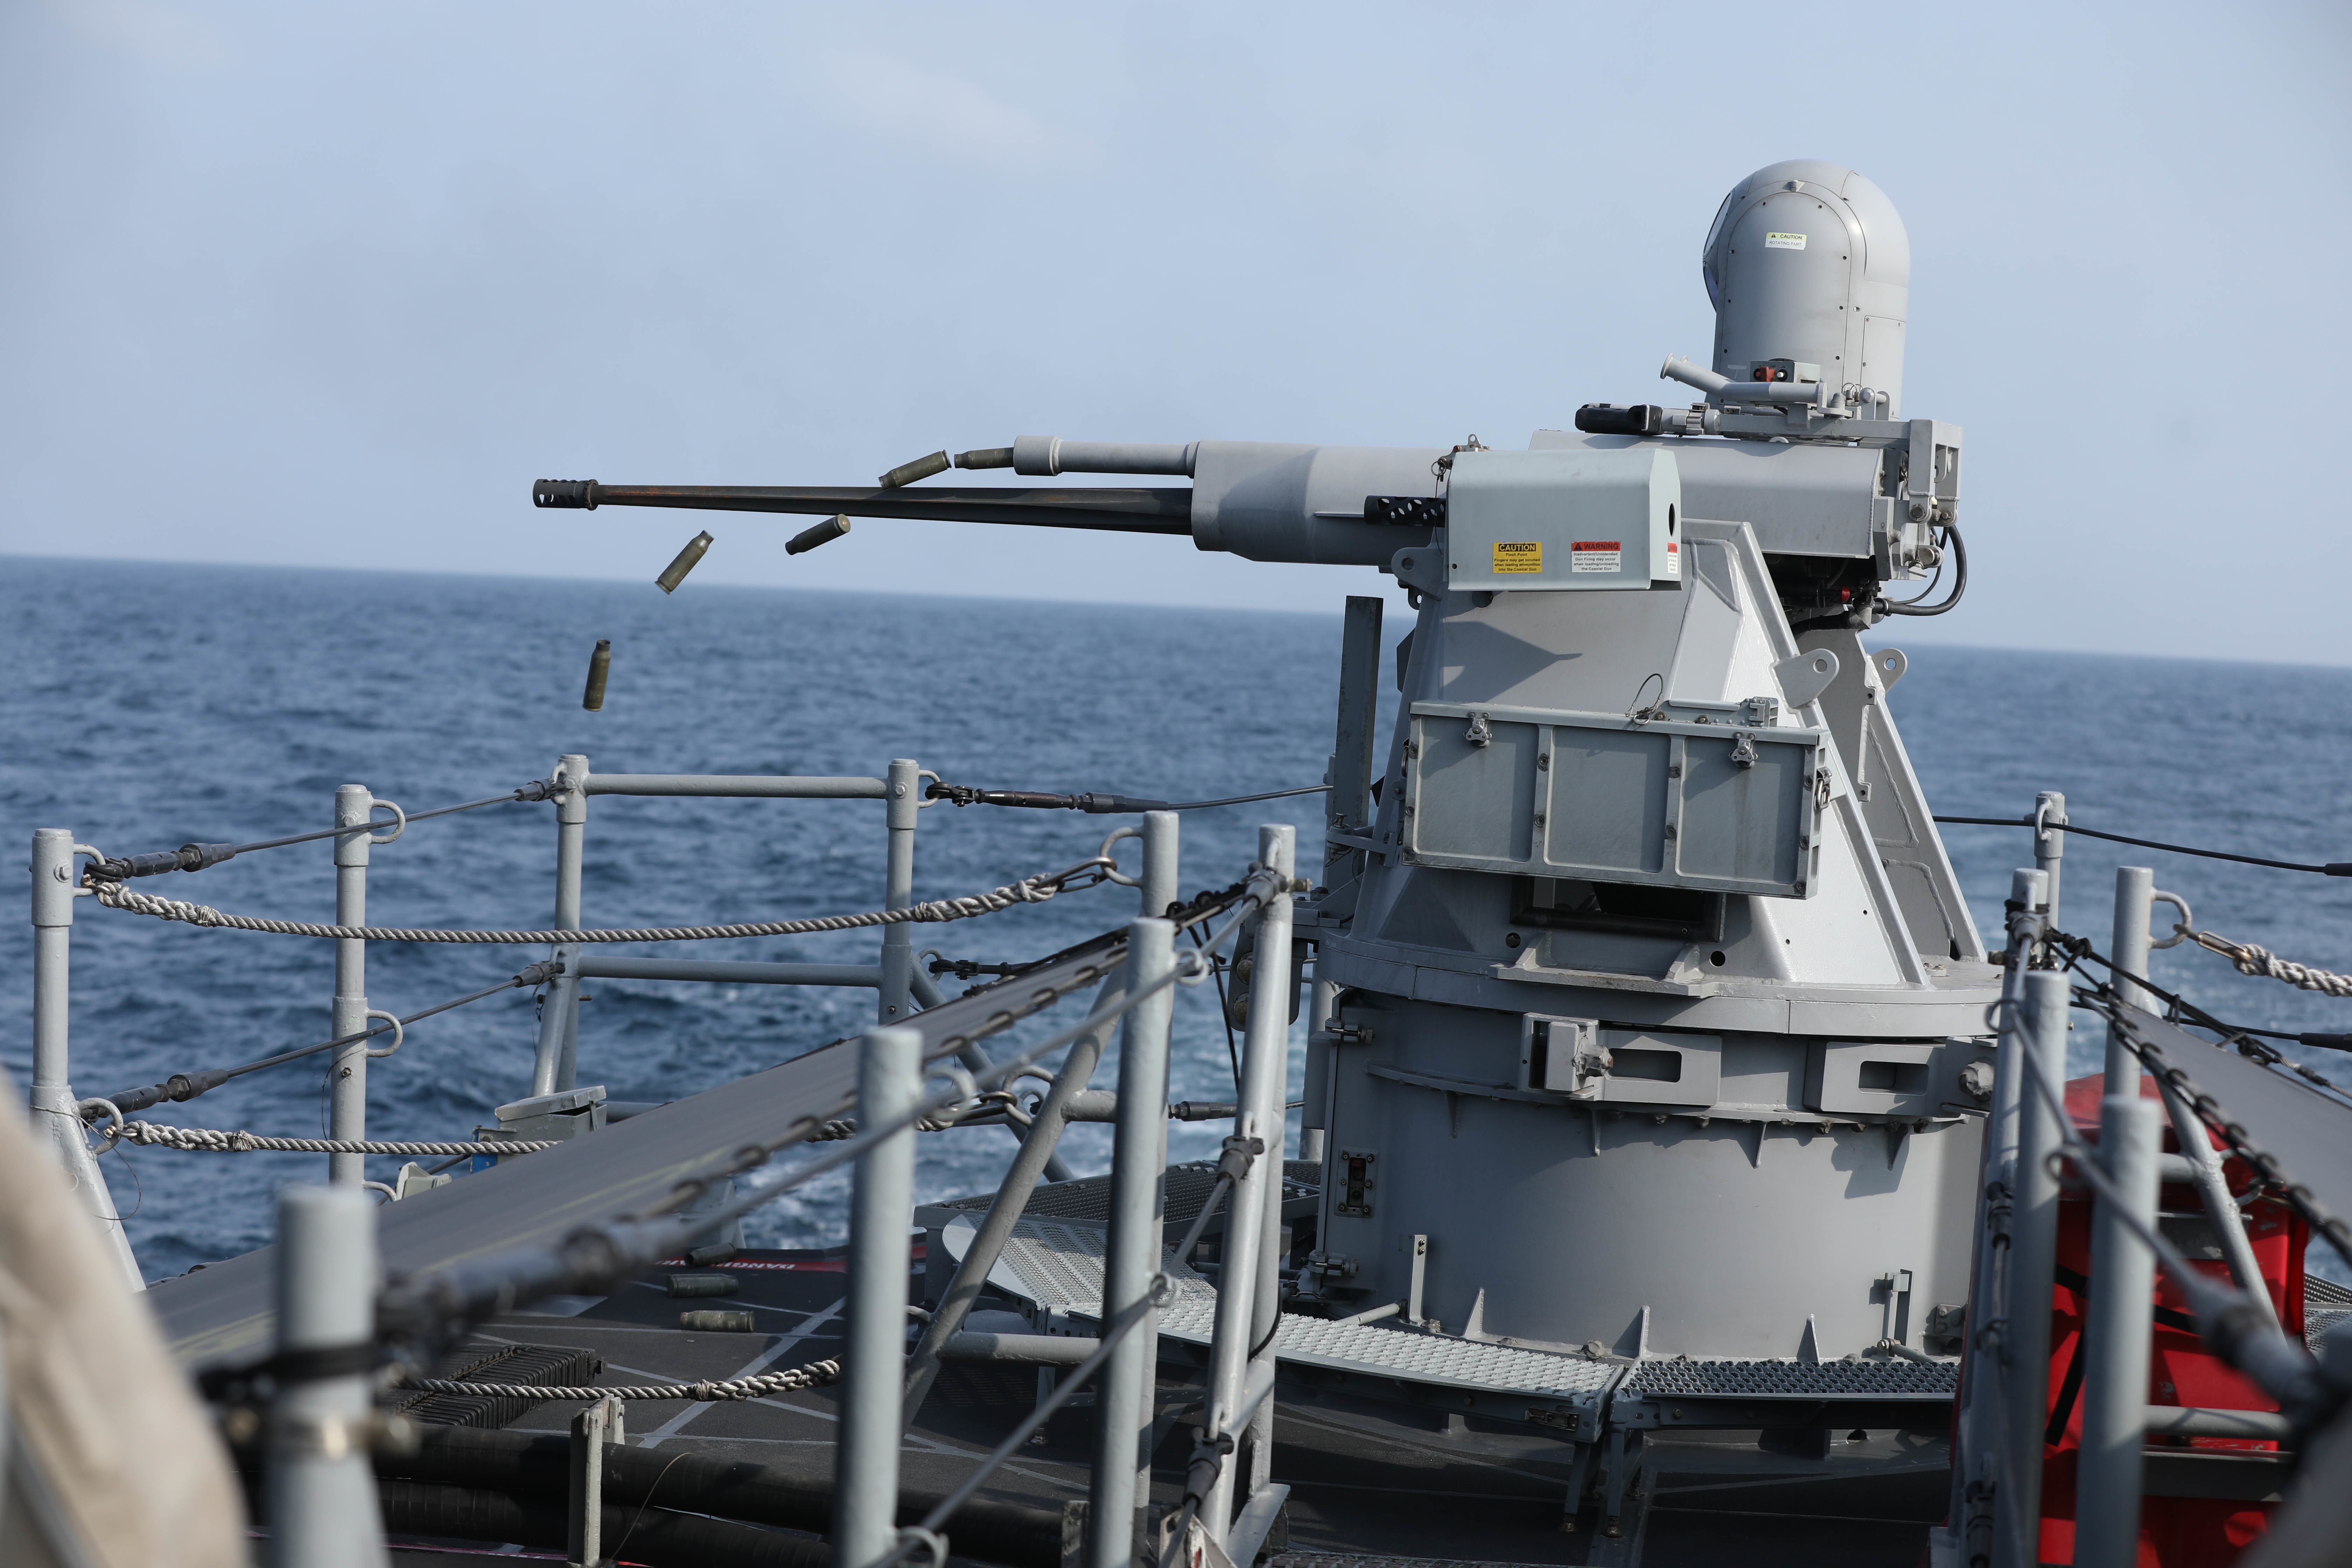 A MK-38 machine gun aboard the coastal patrol ship USS Sirocco (PC 6) fires rounds at simulated enemy ships as part of Griffin Missile Exercise 19. The exercise demonstrated a proven capability for the ships to defend themselves against small boat threats and ensure maritime security through key chokepoints in the U.S. Central Command area of responsibility. 